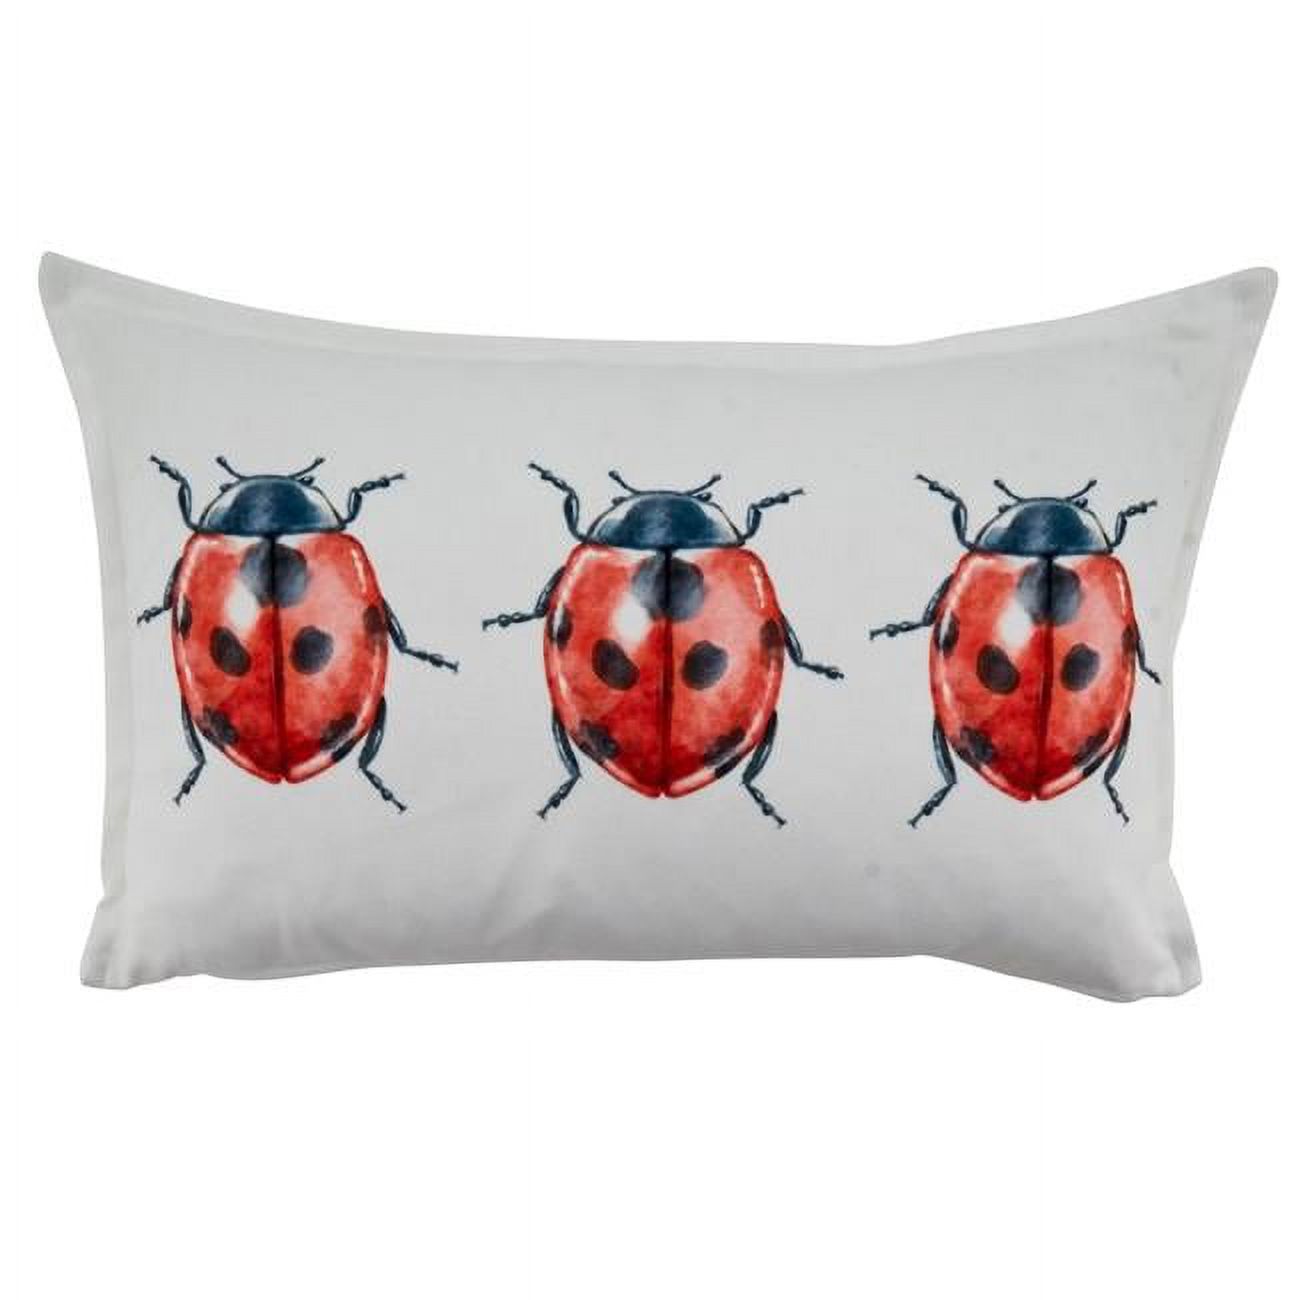 SARO 2105.W1220BD 12 x 20 in. Oblong Down Filled Throw Pillow with Lady Bugs Design  White - image 1 of 1